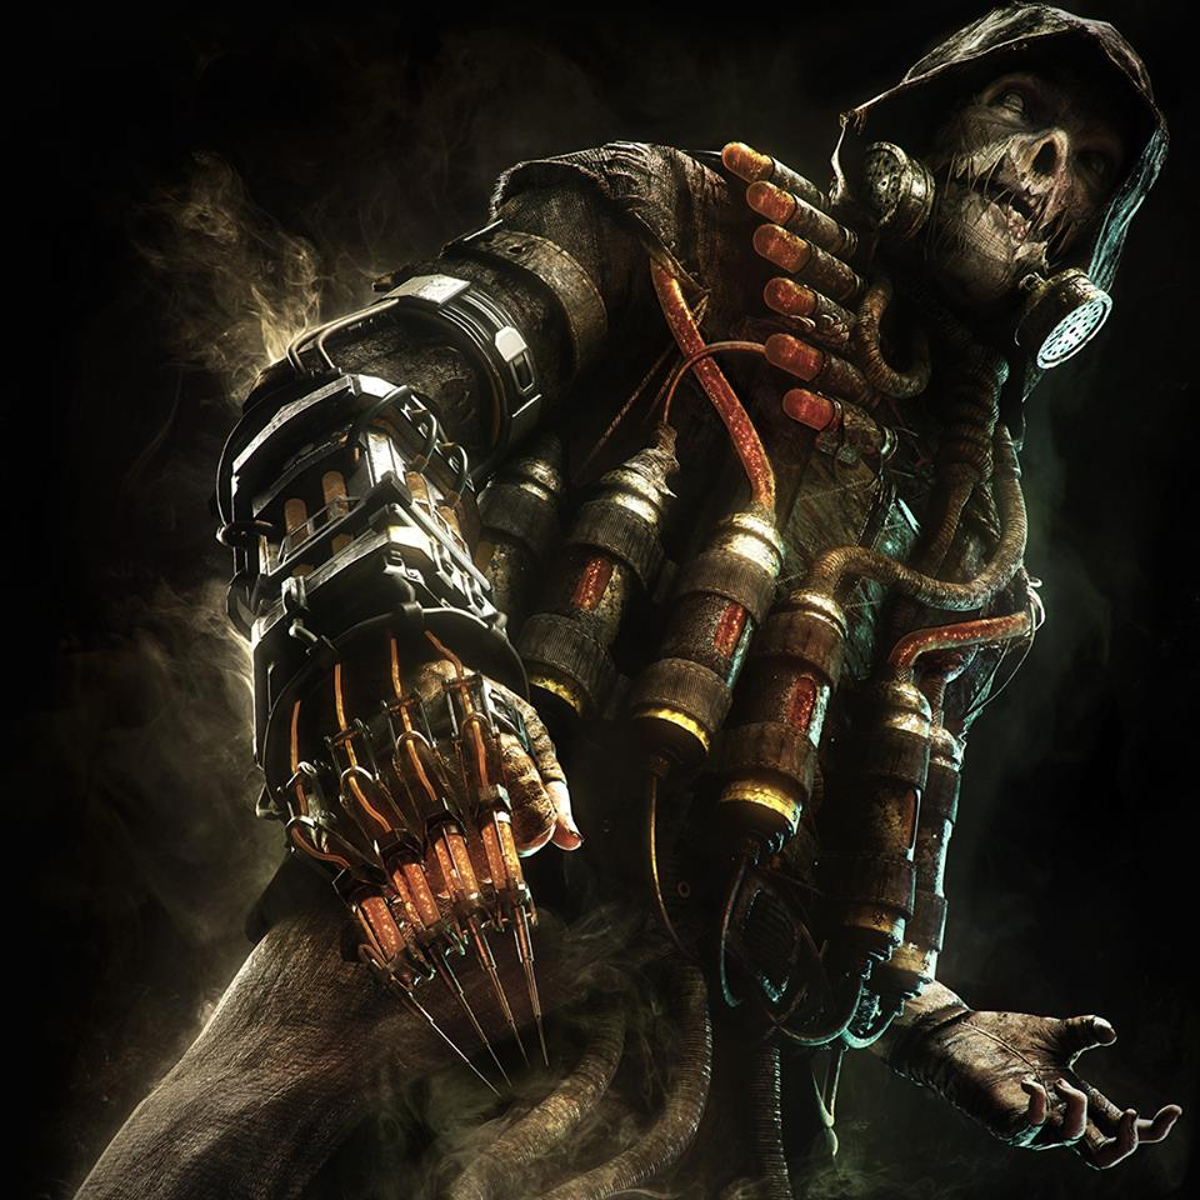 Scarecrow Nightmare pack for Batman: Arkham Knight looks intense | VG247